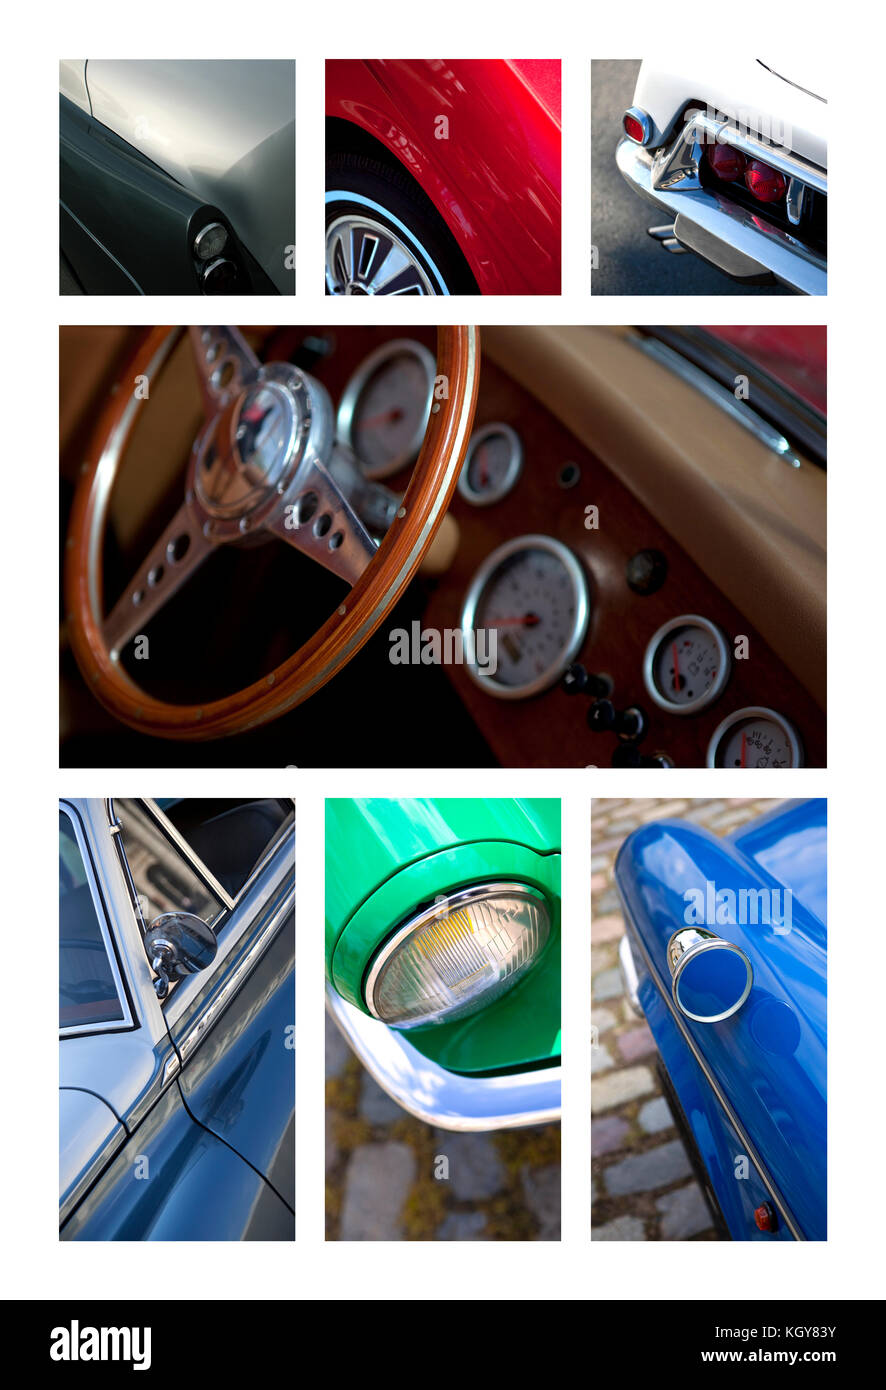 Details of car bodies on a collage Stock Photo